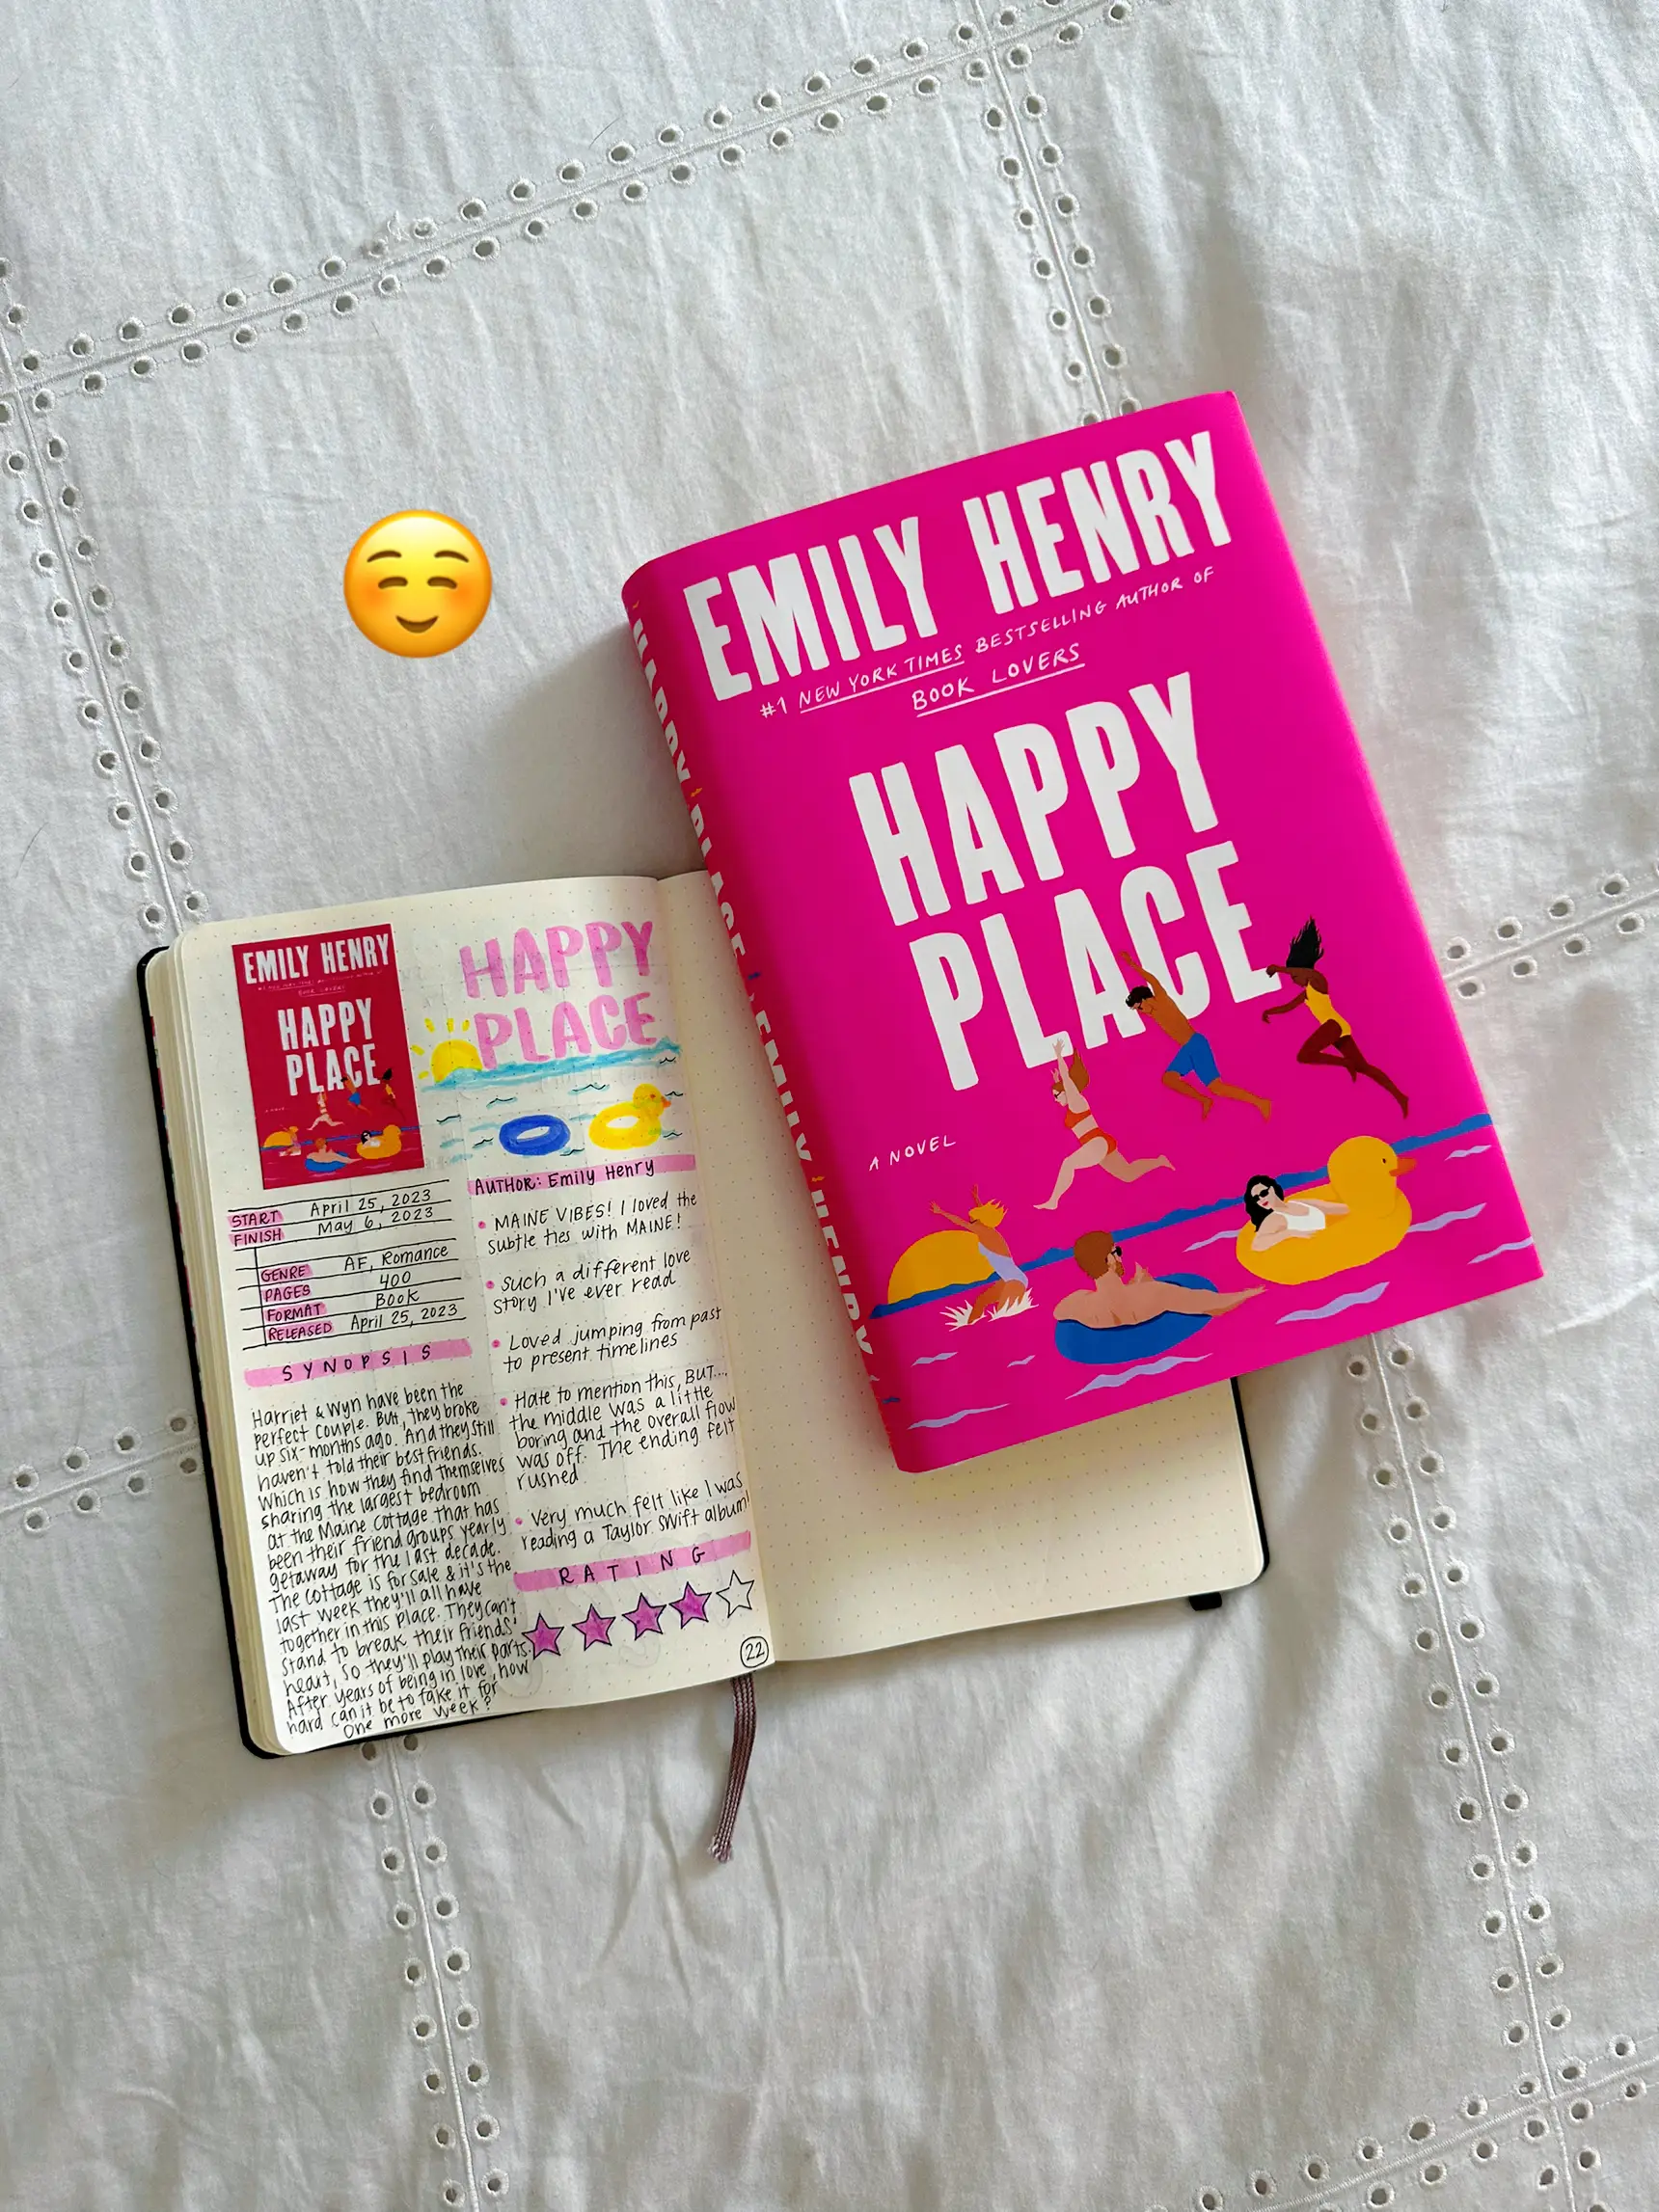  A book titled "Happy Place" by Emily Henry is sitting on a table next to a book titled "Emily Henry".